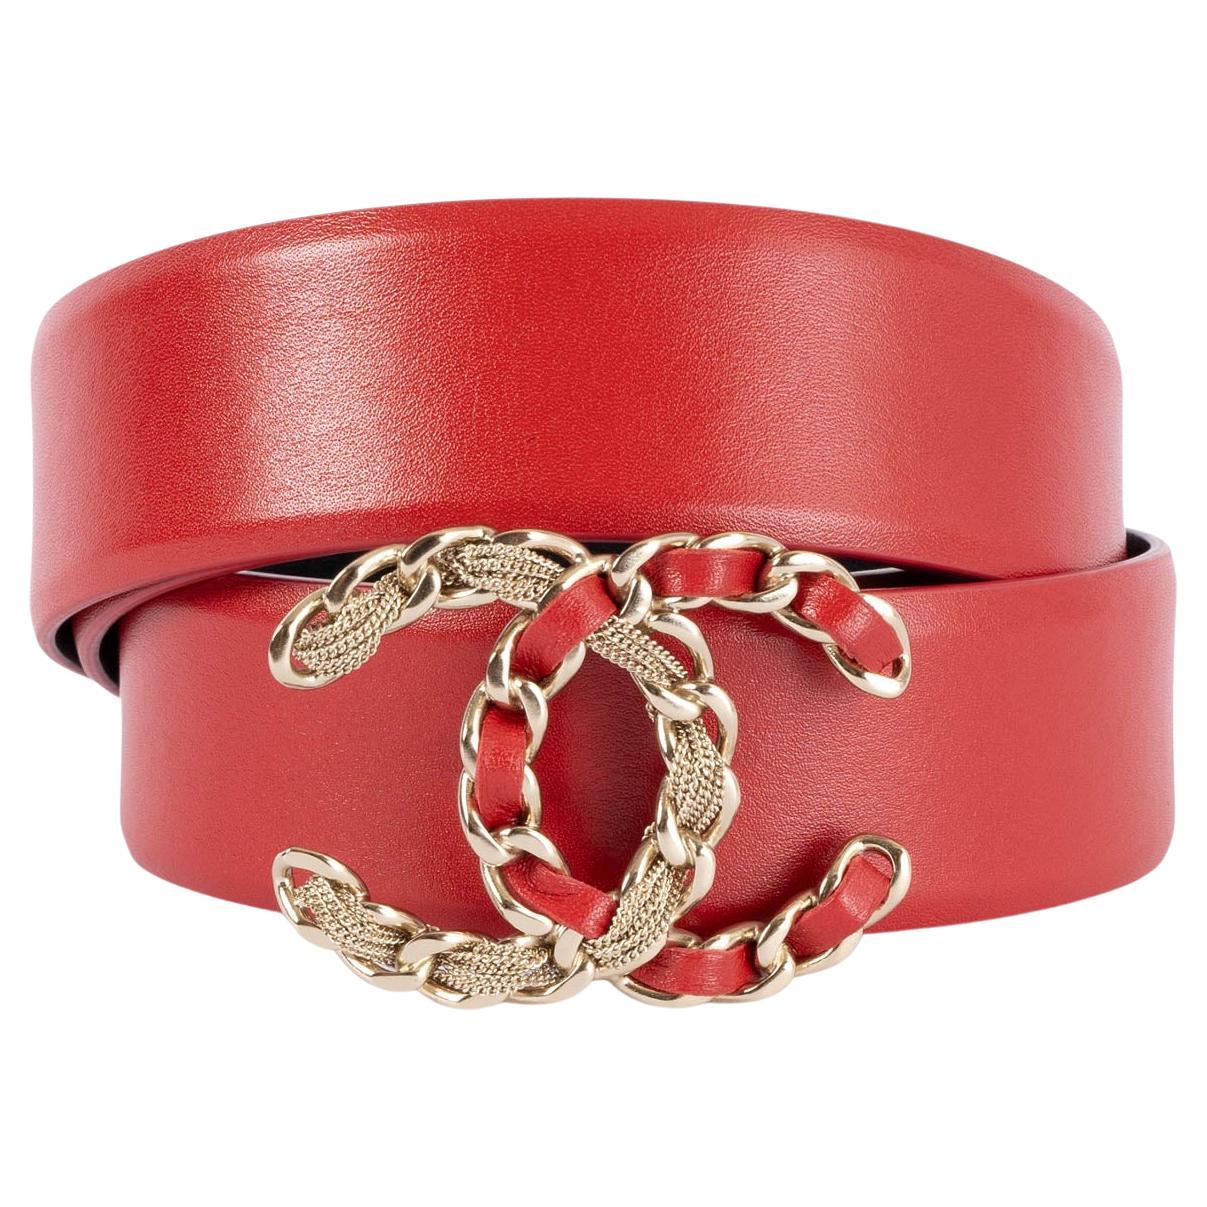 chanel leather belts for women